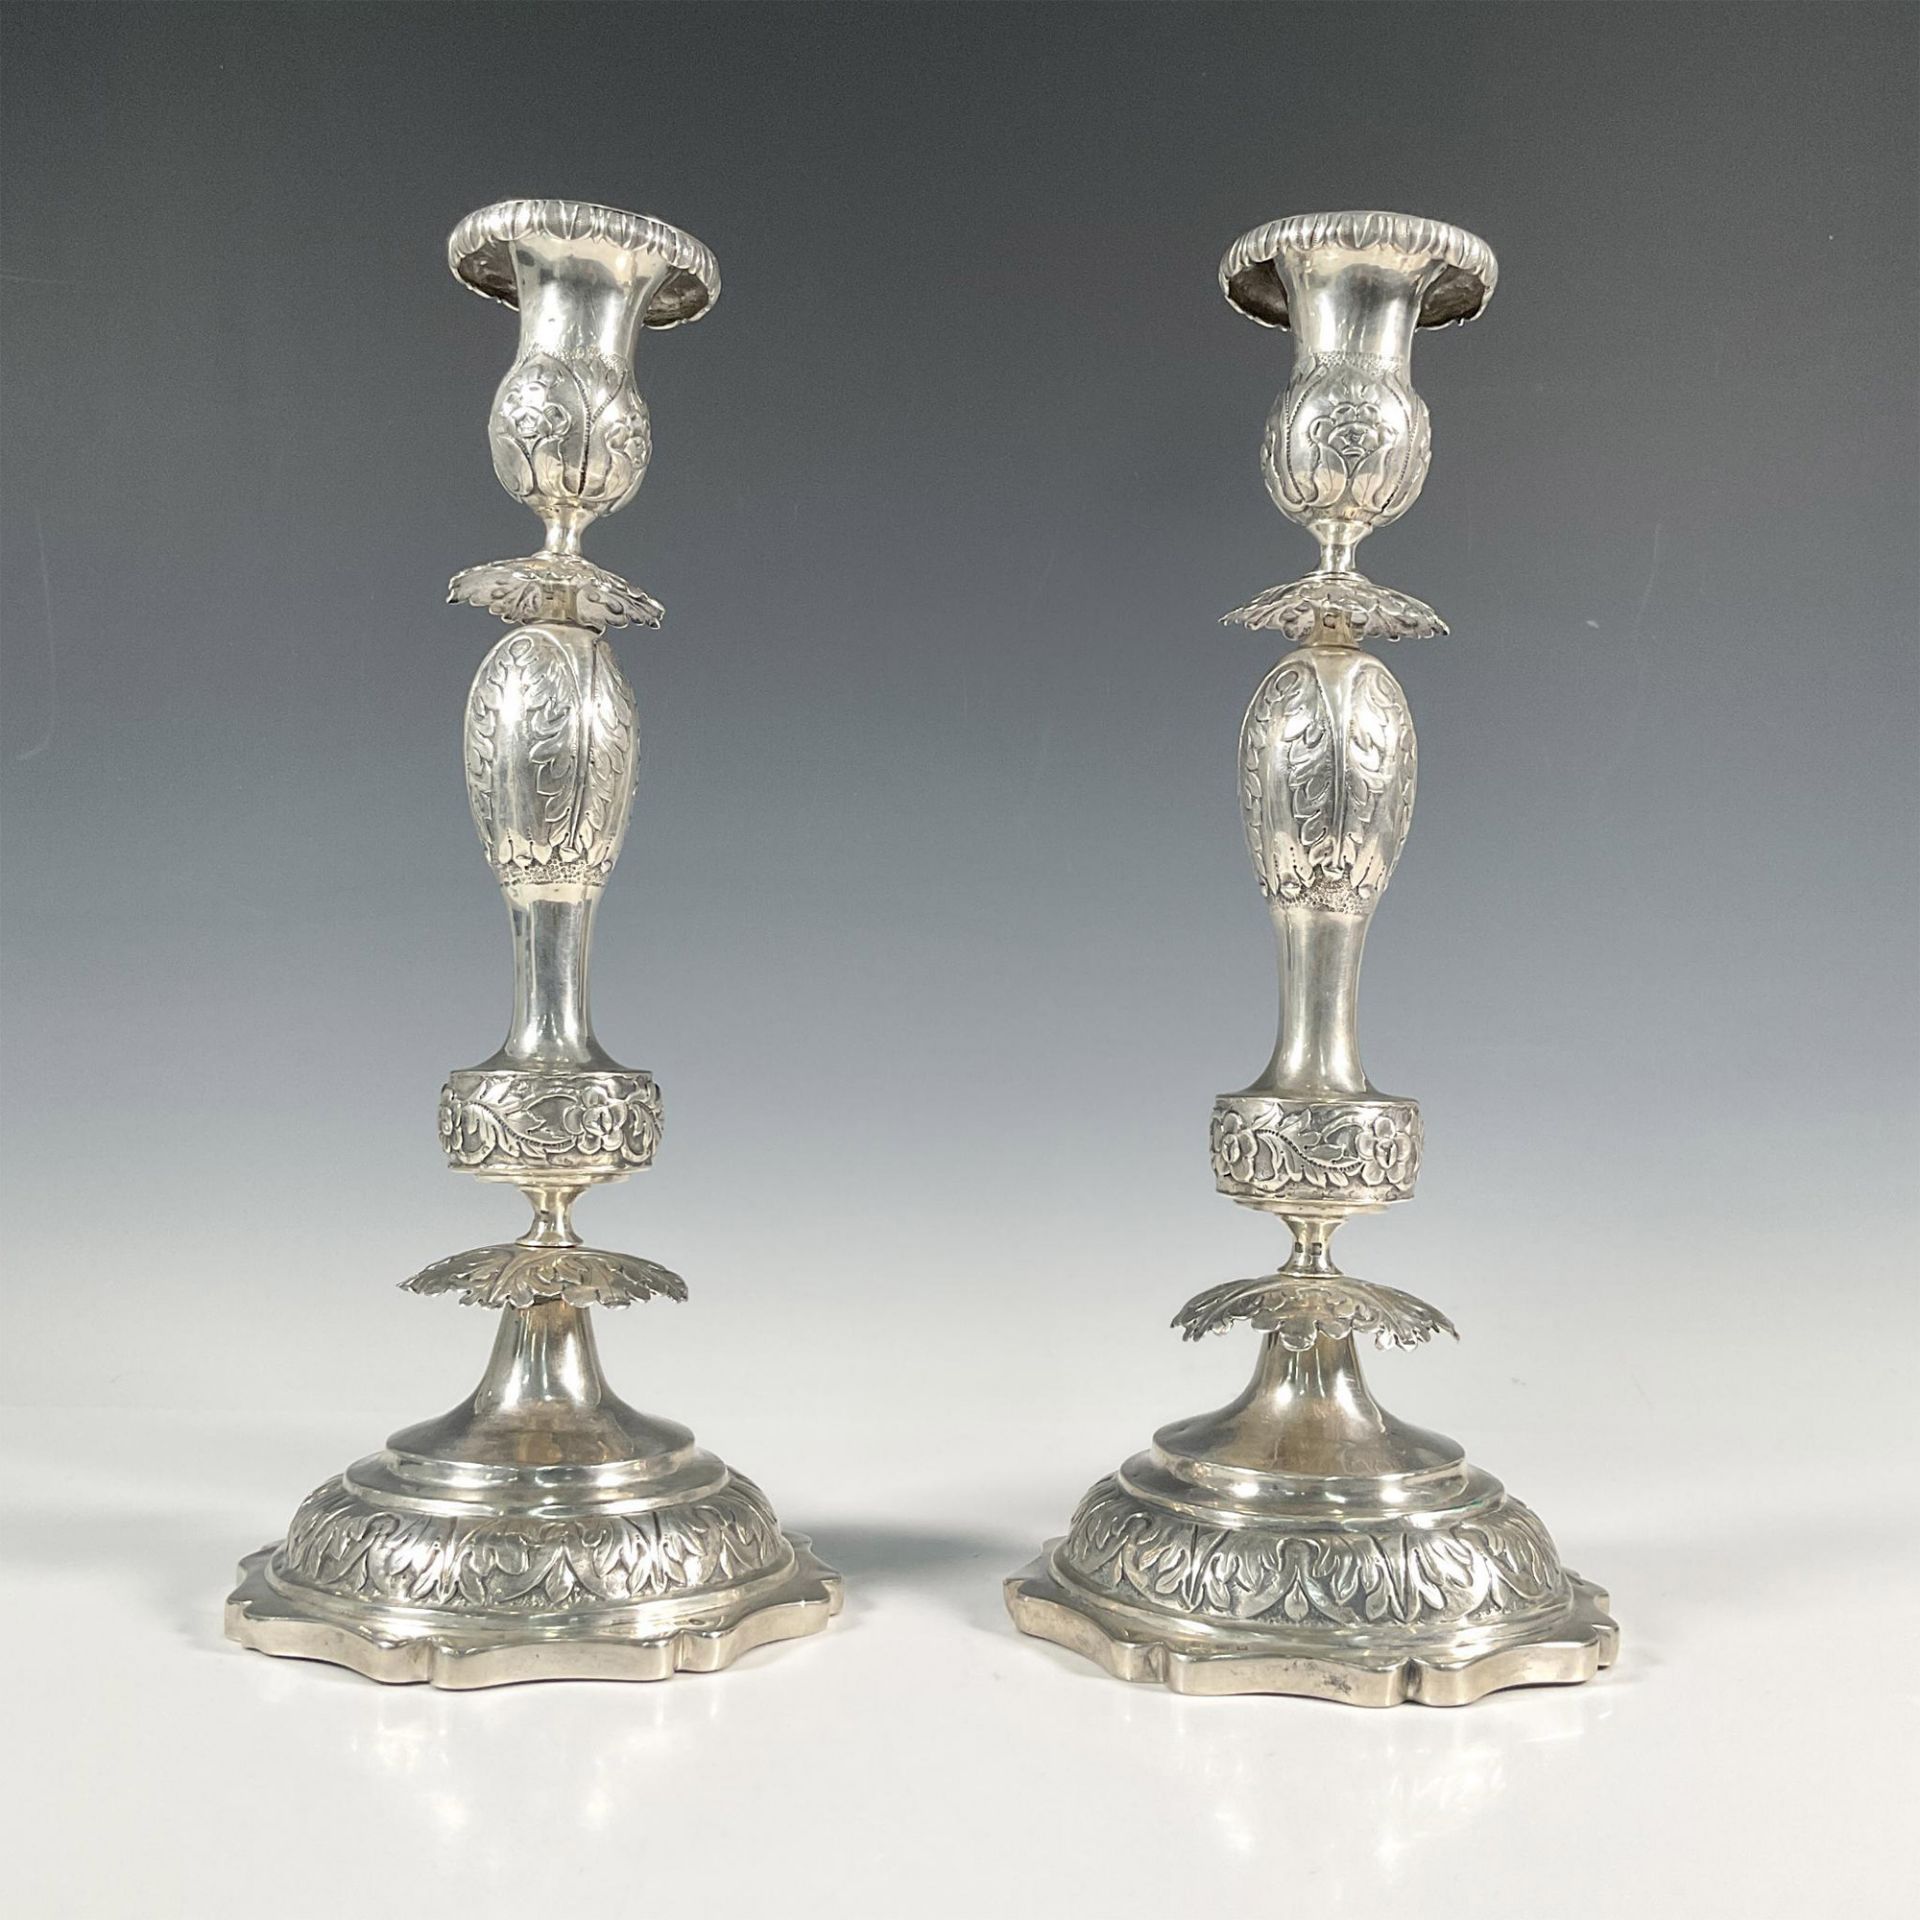 Pair of Russian Sterling Silver Candlesticks - Image 2 of 3